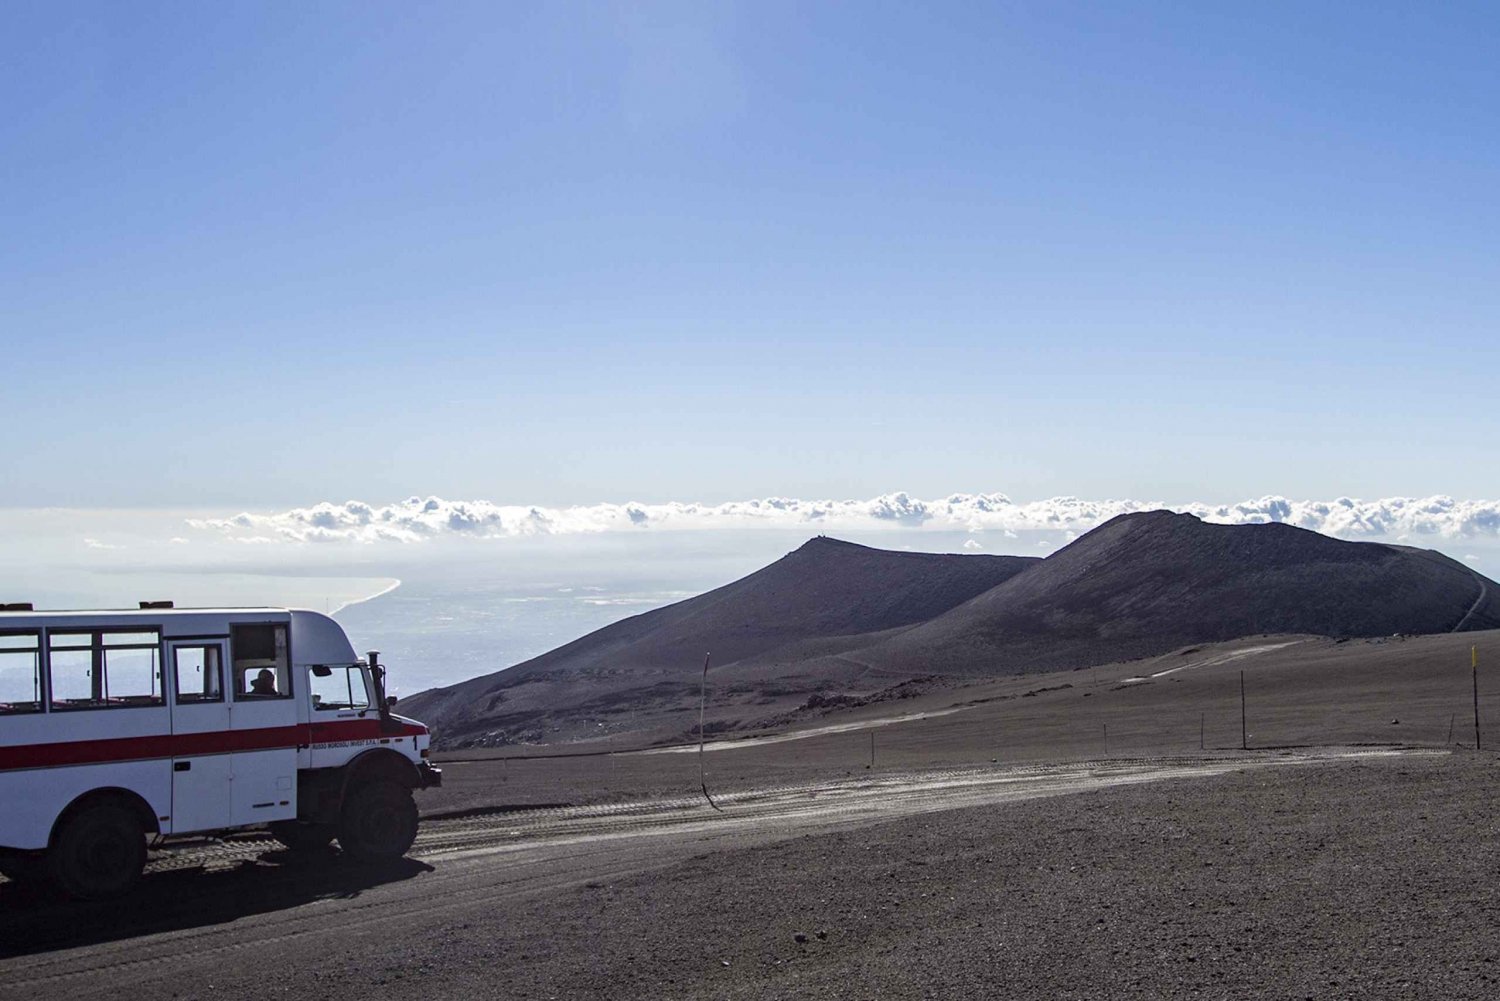 Mount Etna: Roundtrip Cable Car and 4x4 Bus Ticket